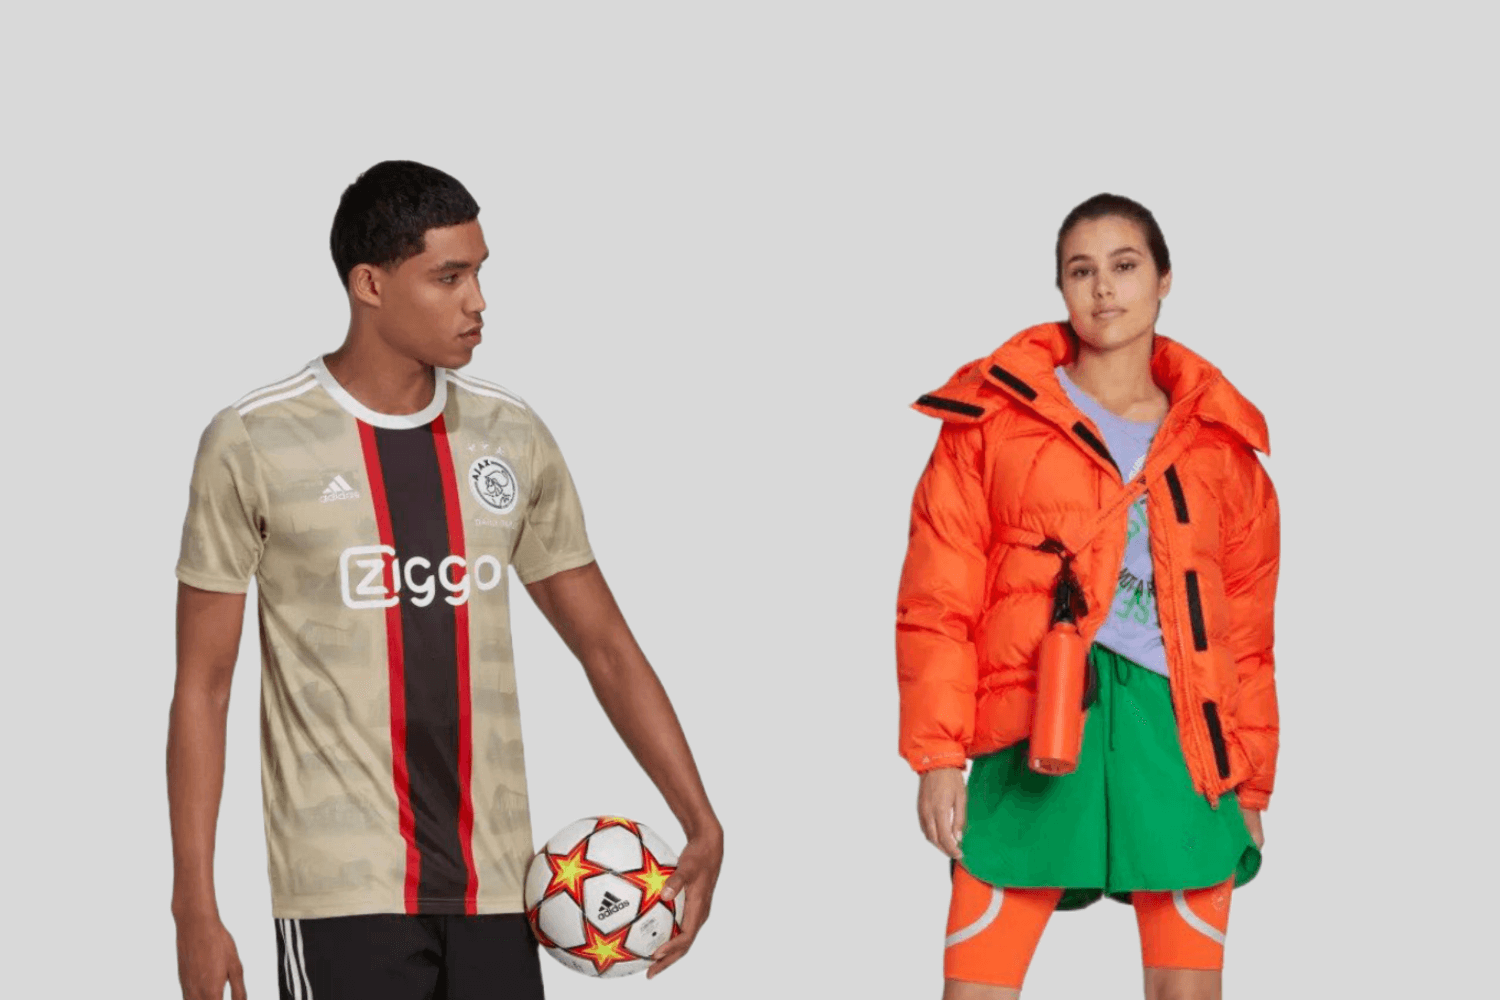 Top items from the new adidas collection